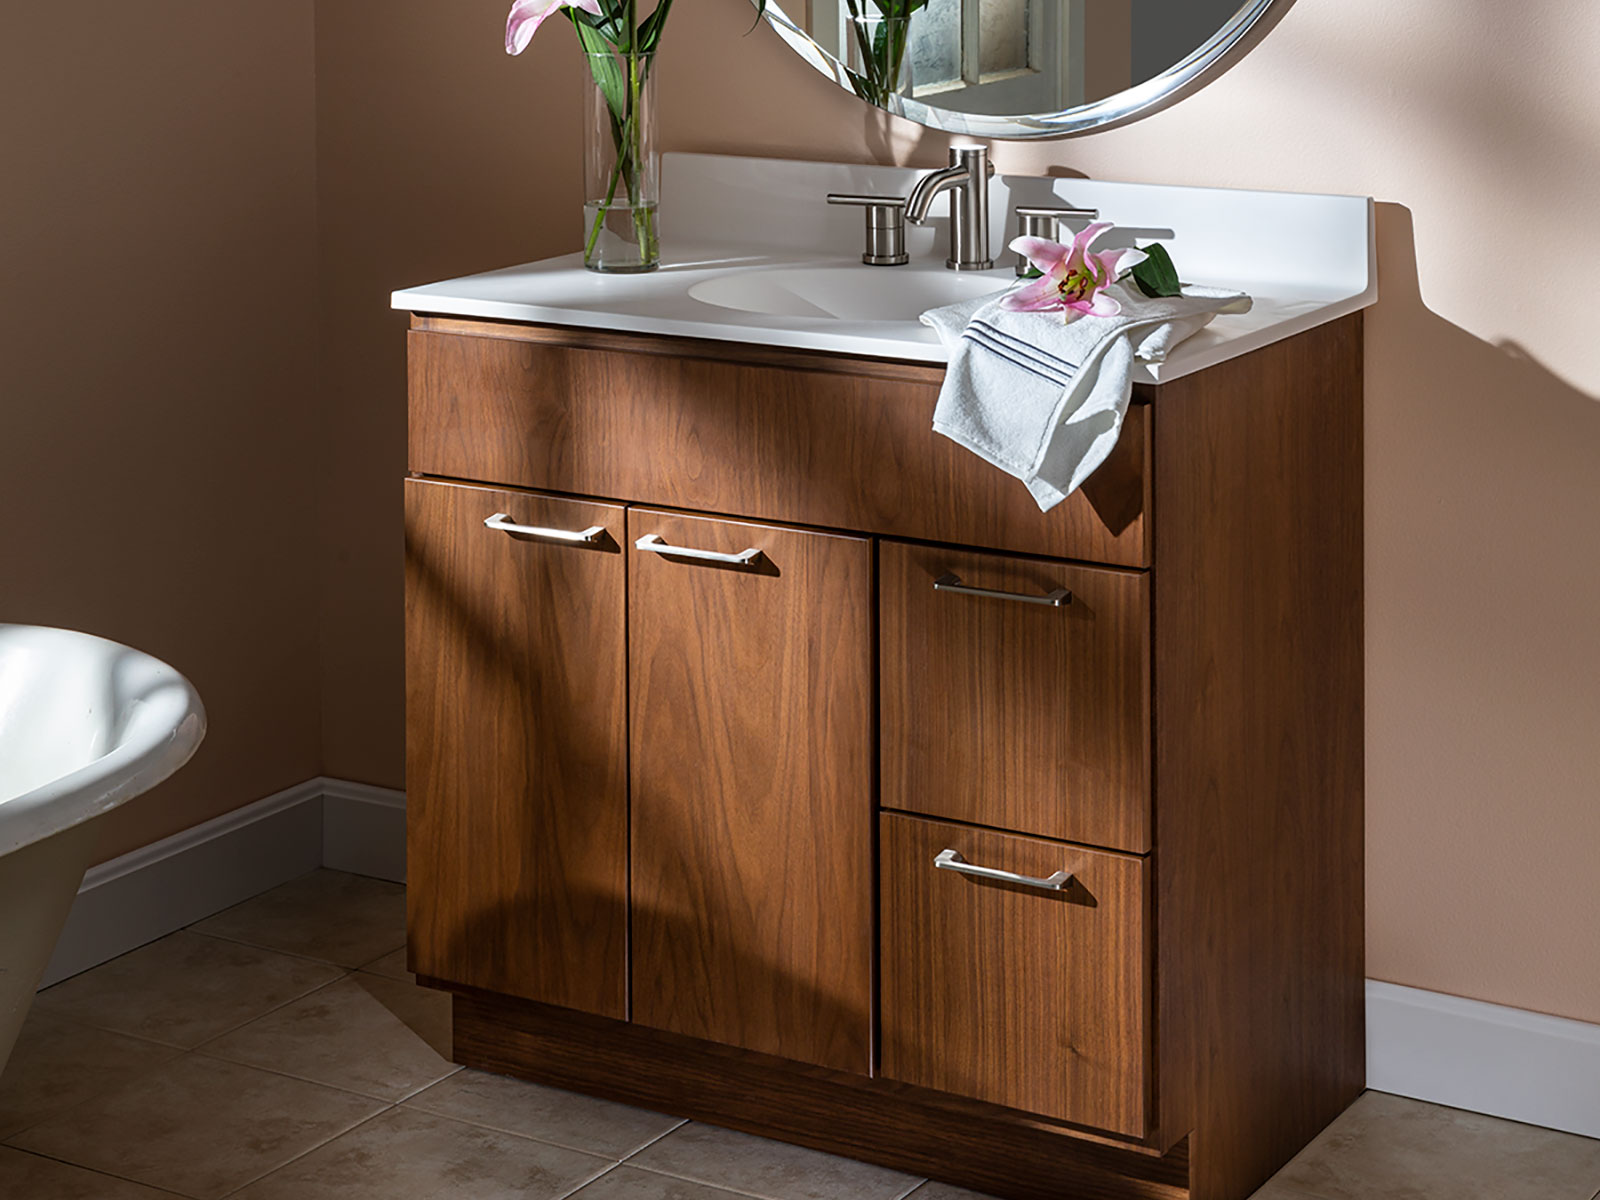 Bath Vanities And Cabinetry, Small Bath Vanity With Sink